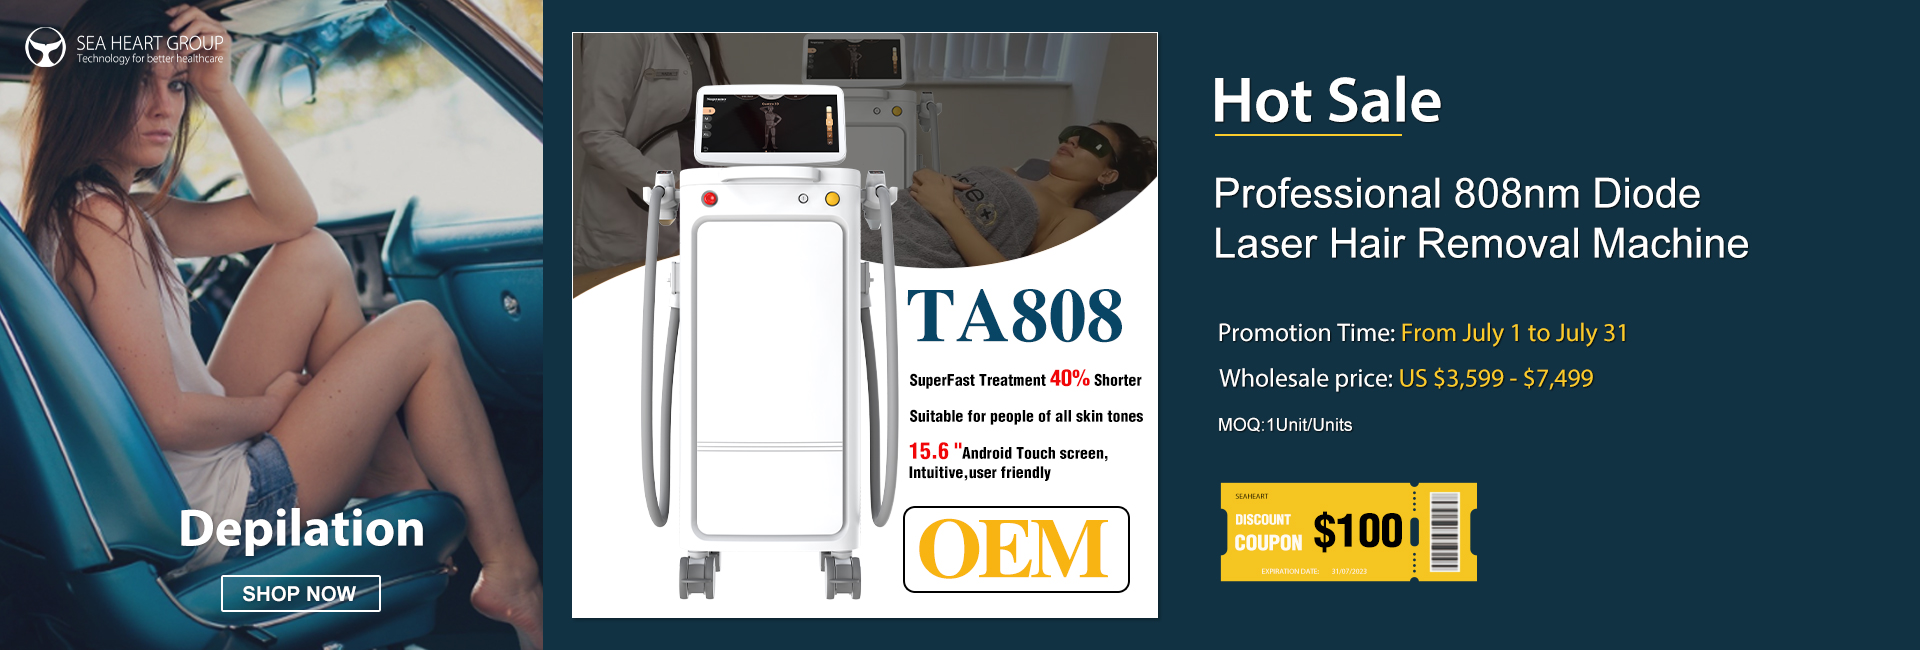 Diode Laser Hair Removal Systems